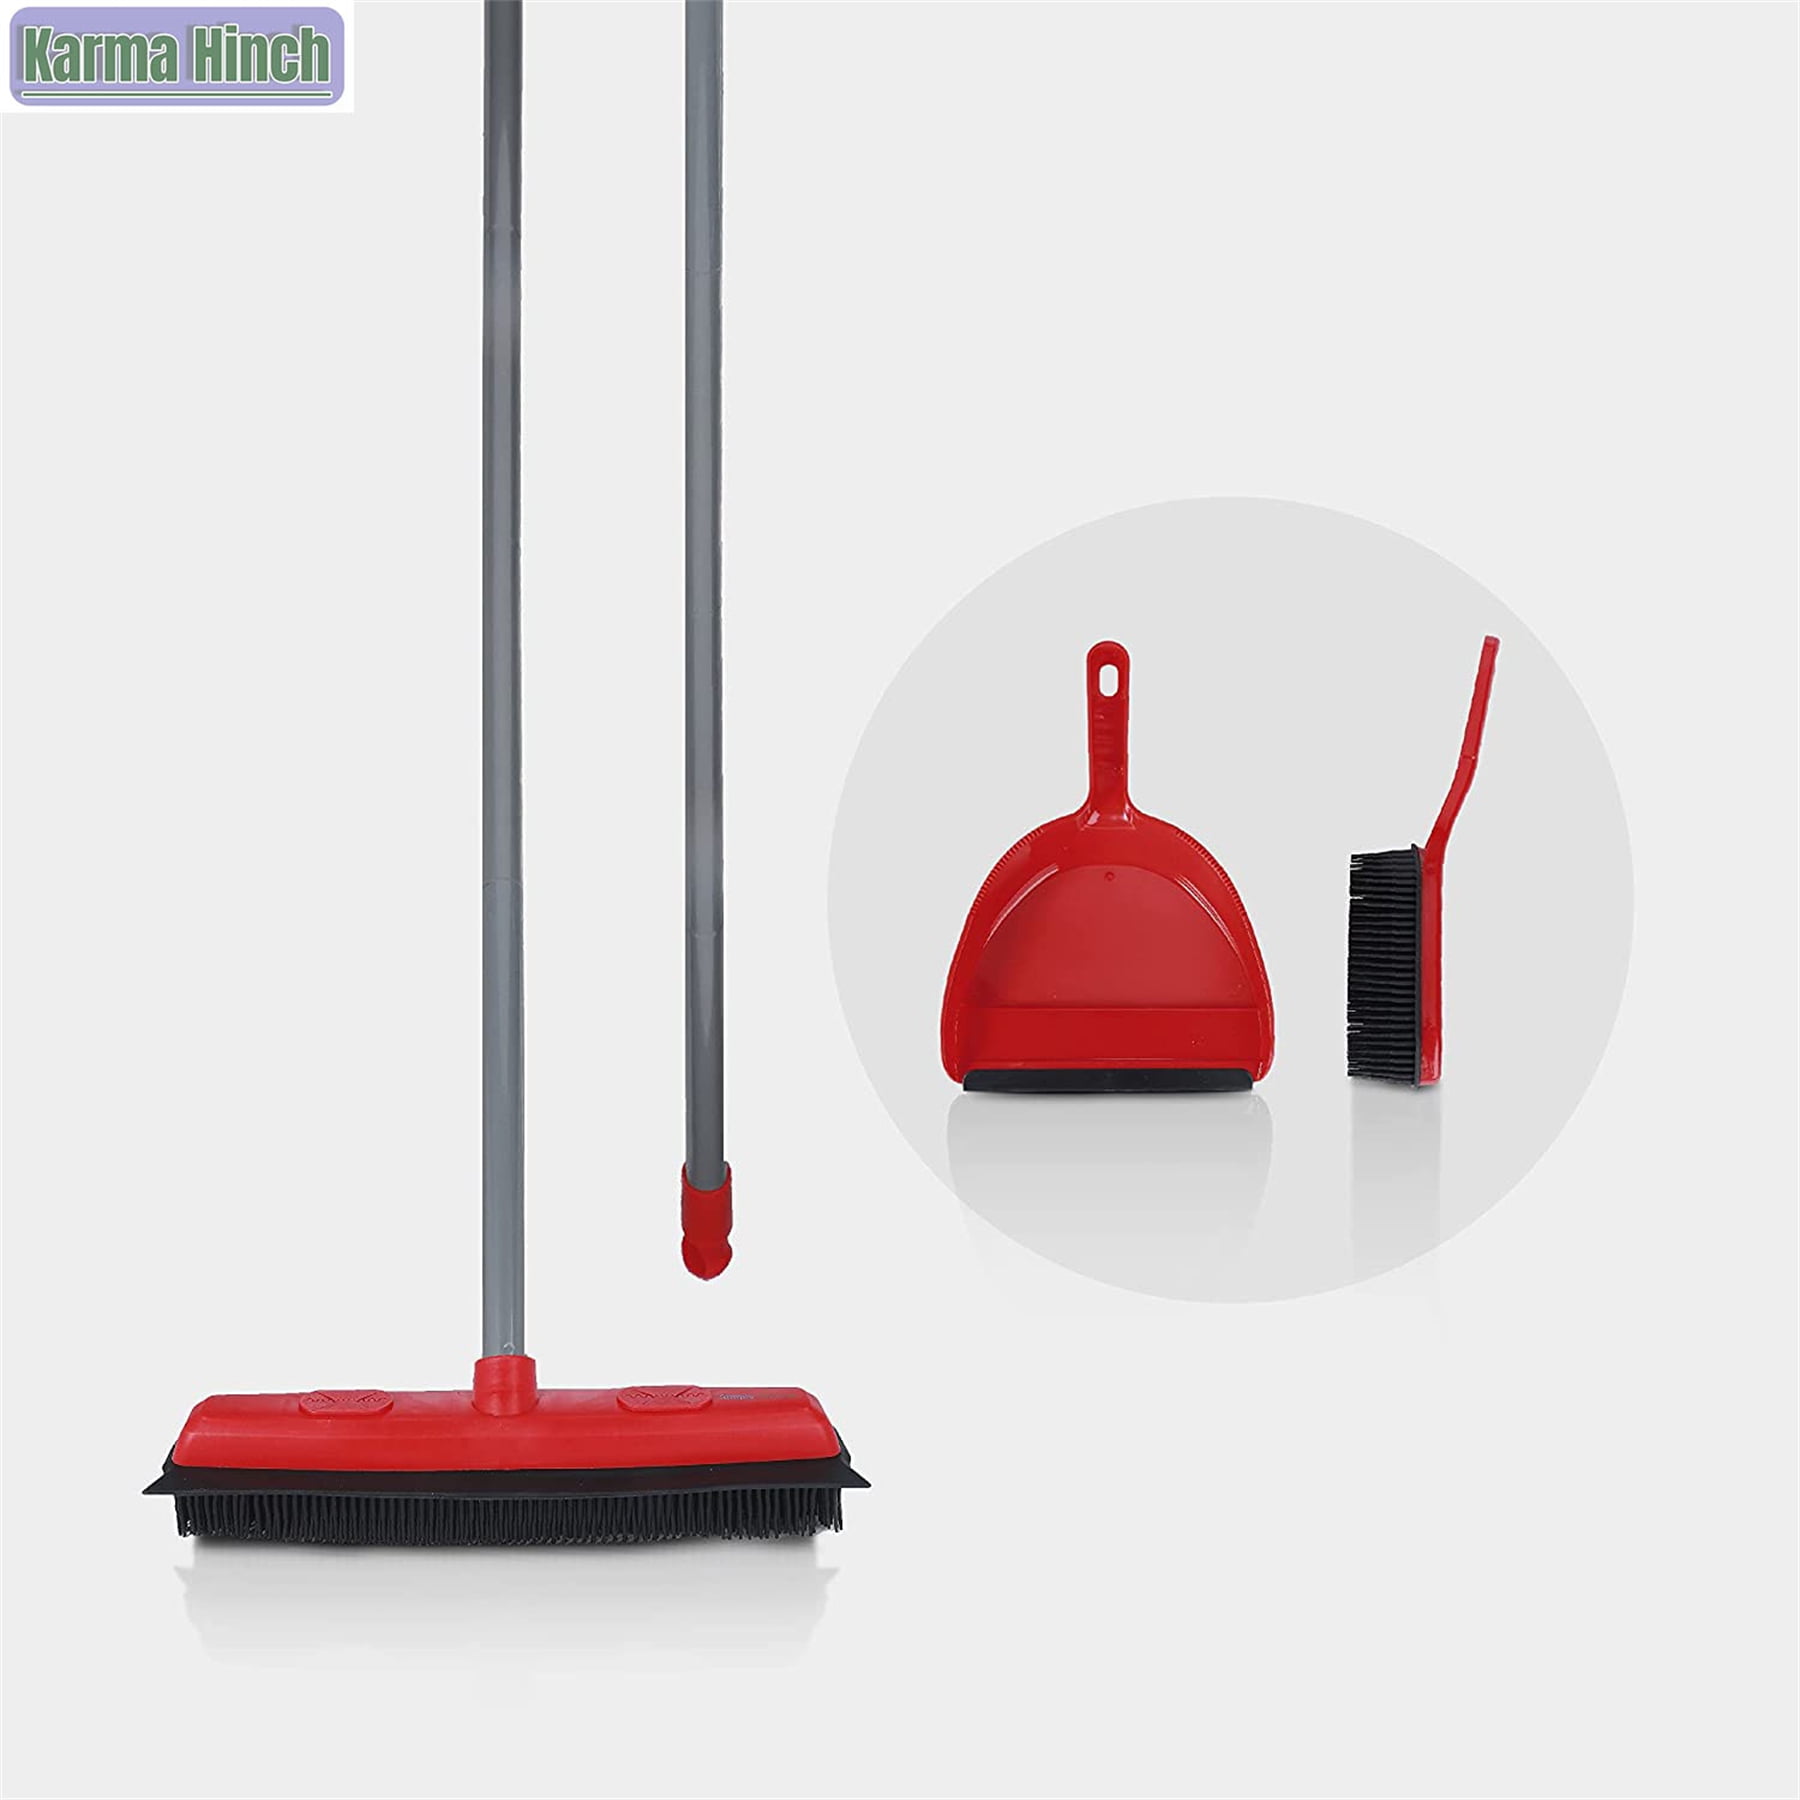 DOITOOL 2pcs Splicable Broom Collapsible Broom Metal Dustpan Carpet Brushes  for Cleaning Handheld Broom and Dustpan Cleaning Dustpan Kit Hair Sweeping